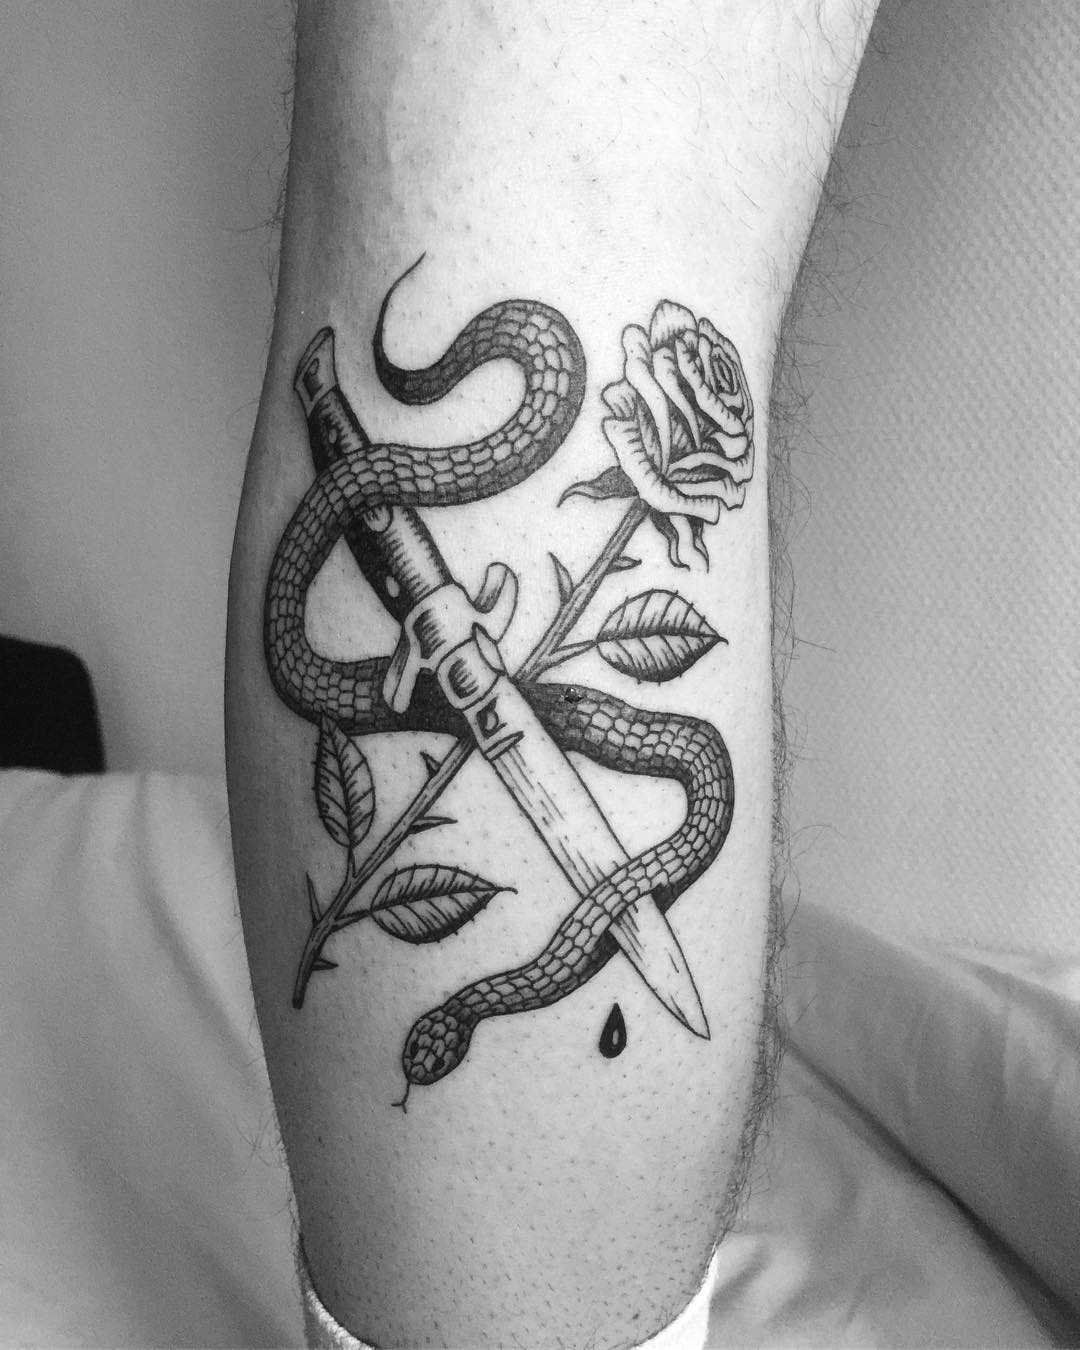 Knife, snake, and rose tattoo